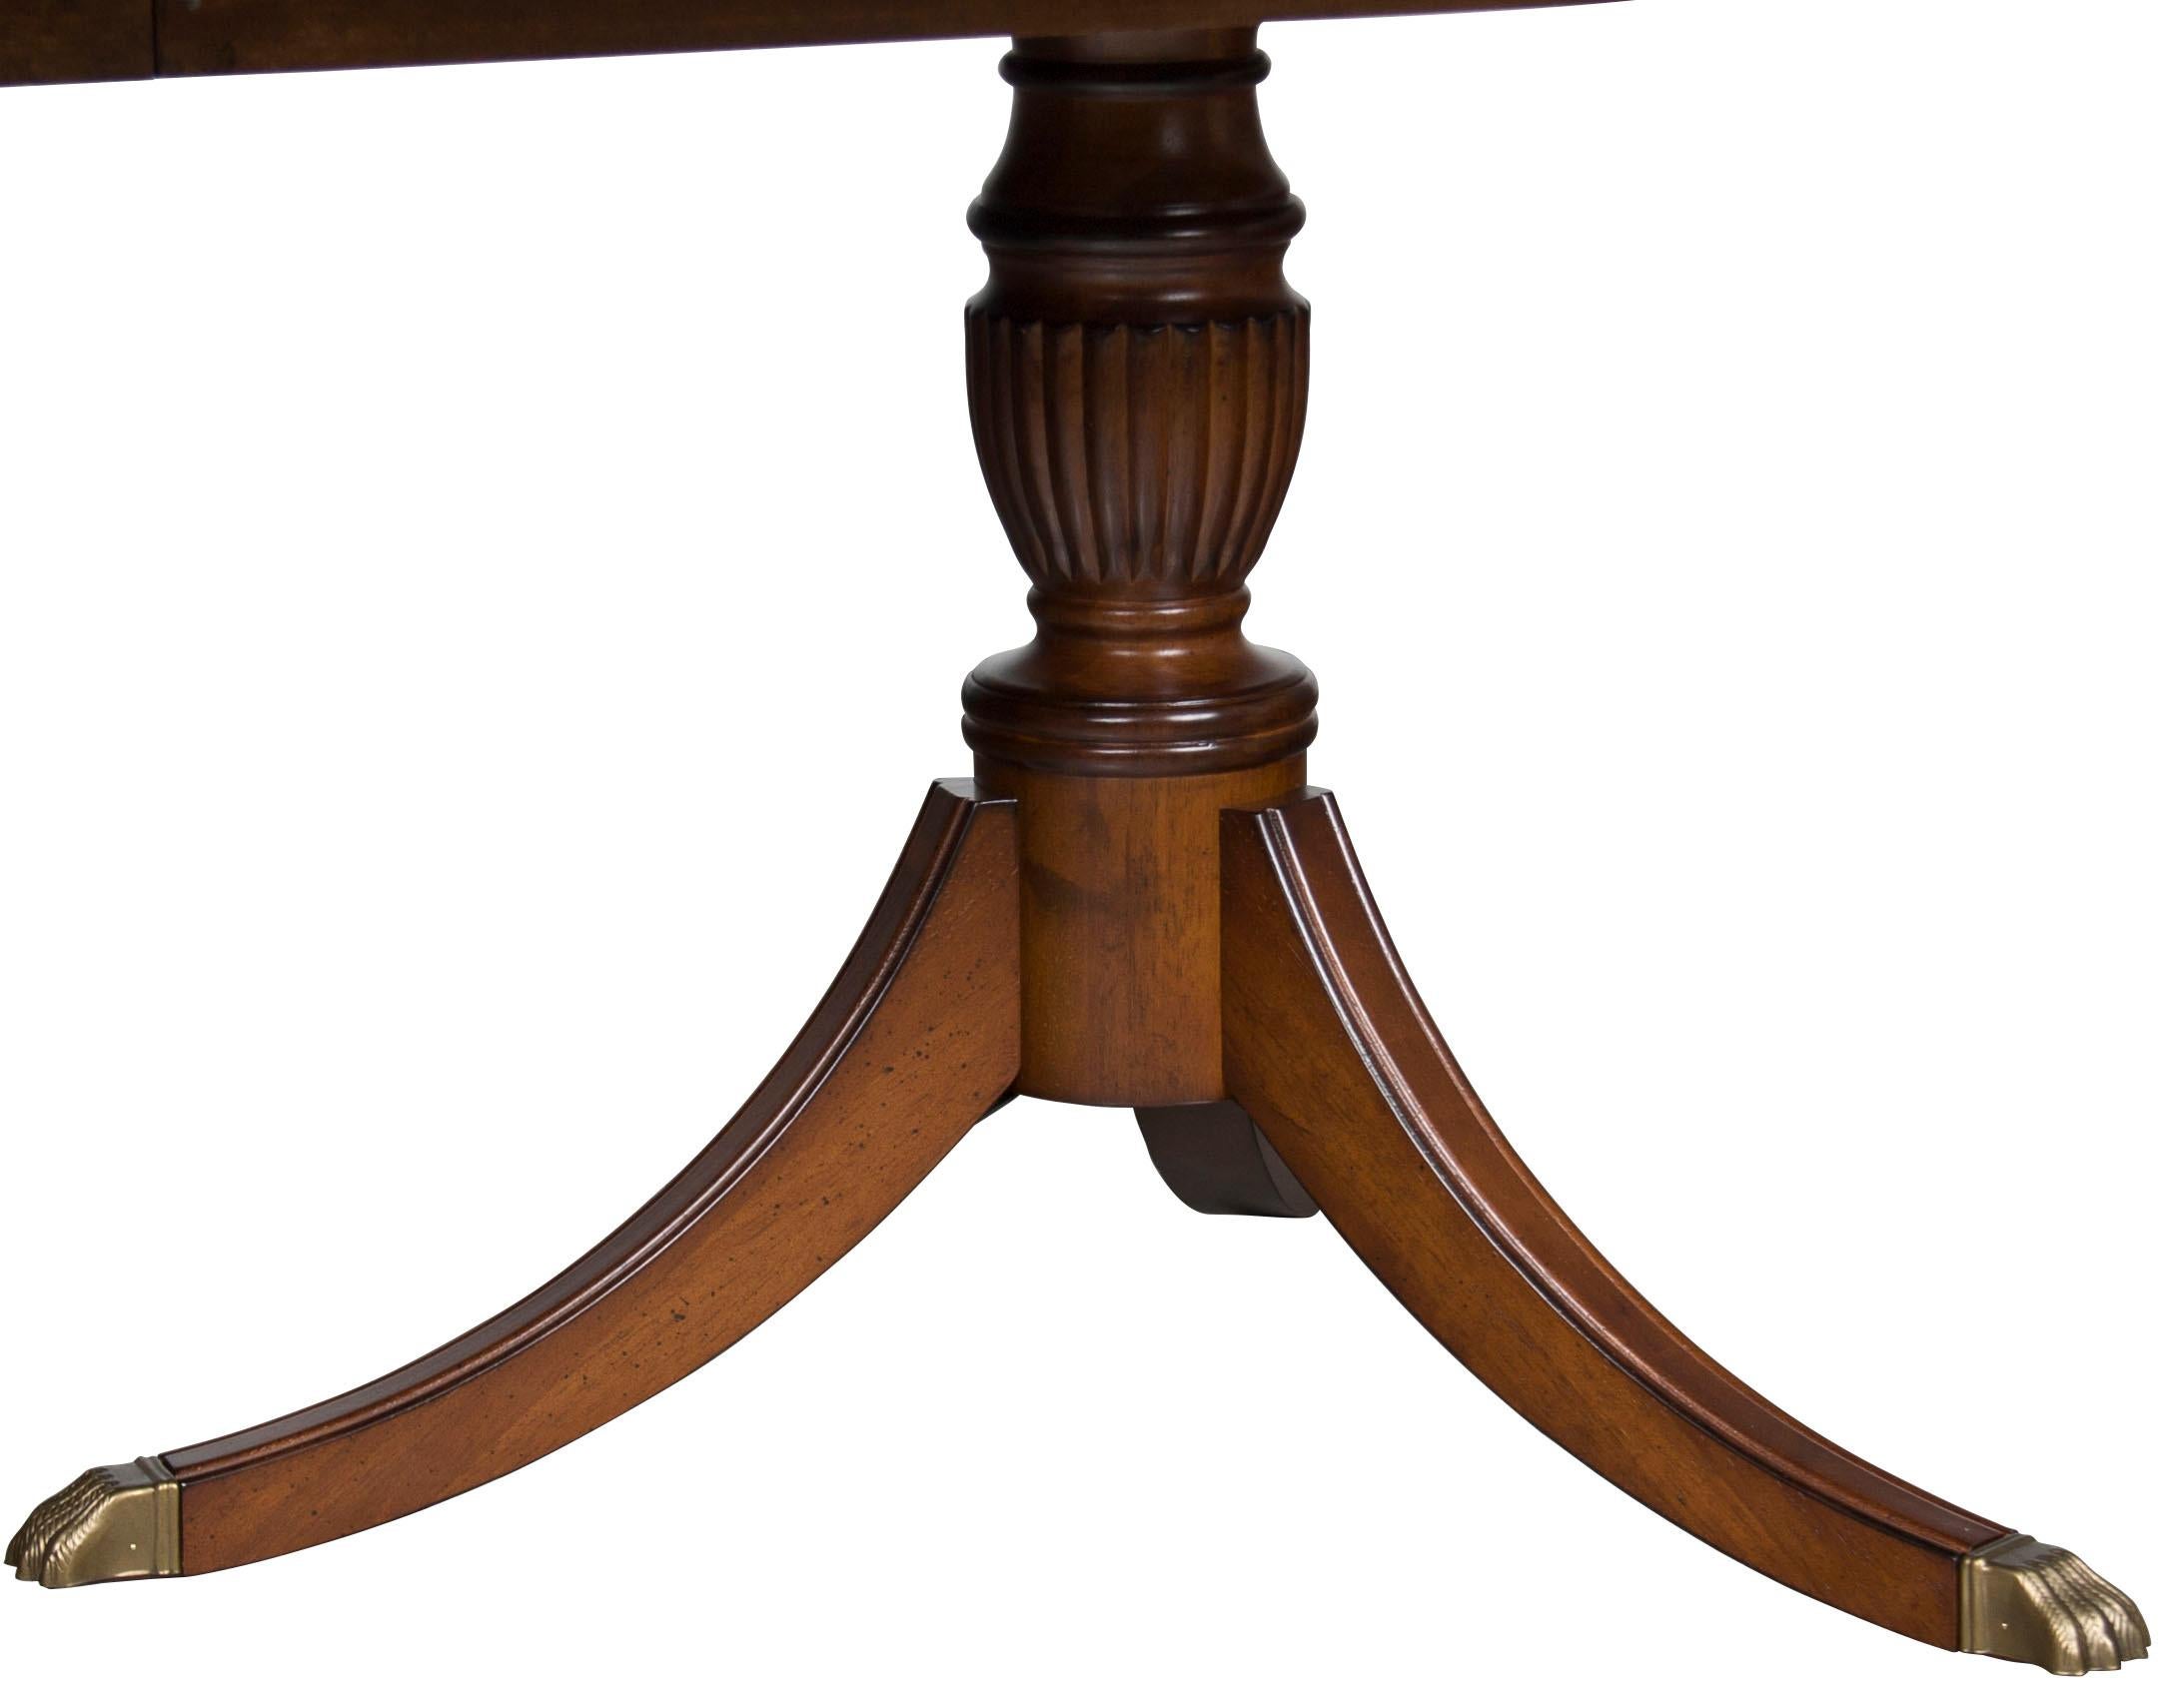 Here we have a stunningly crafted and beautiful double pedestal dining room table. Lovingly made with the finest woods chosen for their distinctive grain patterns, this piece will center any dining room in elegant style. Also, conveniently designed